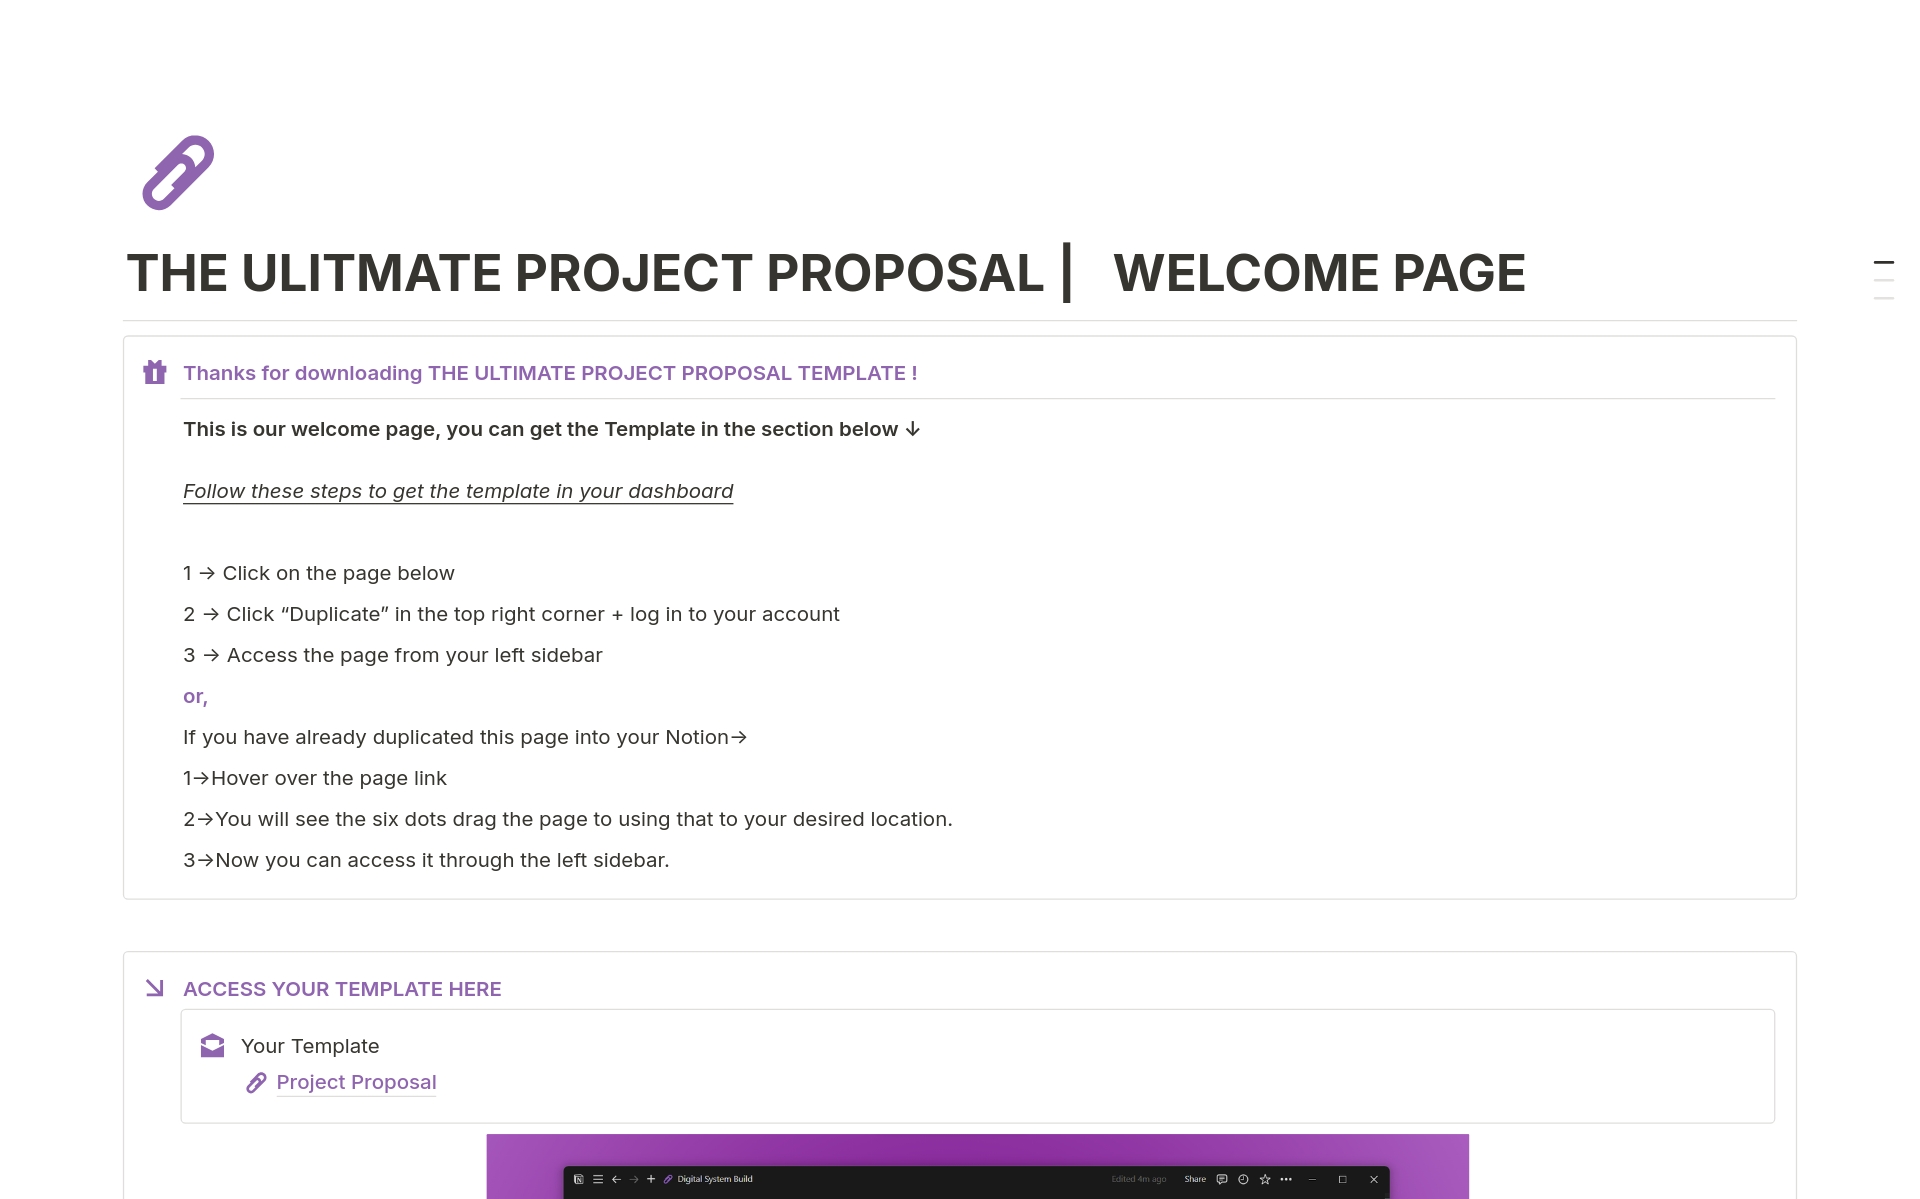 Want to take your Project Proposals to the next level?

This is the template for you!

"Use this project proposal template to craft compelling, professional proposals with your brand identity, seamlessly within Notion."
